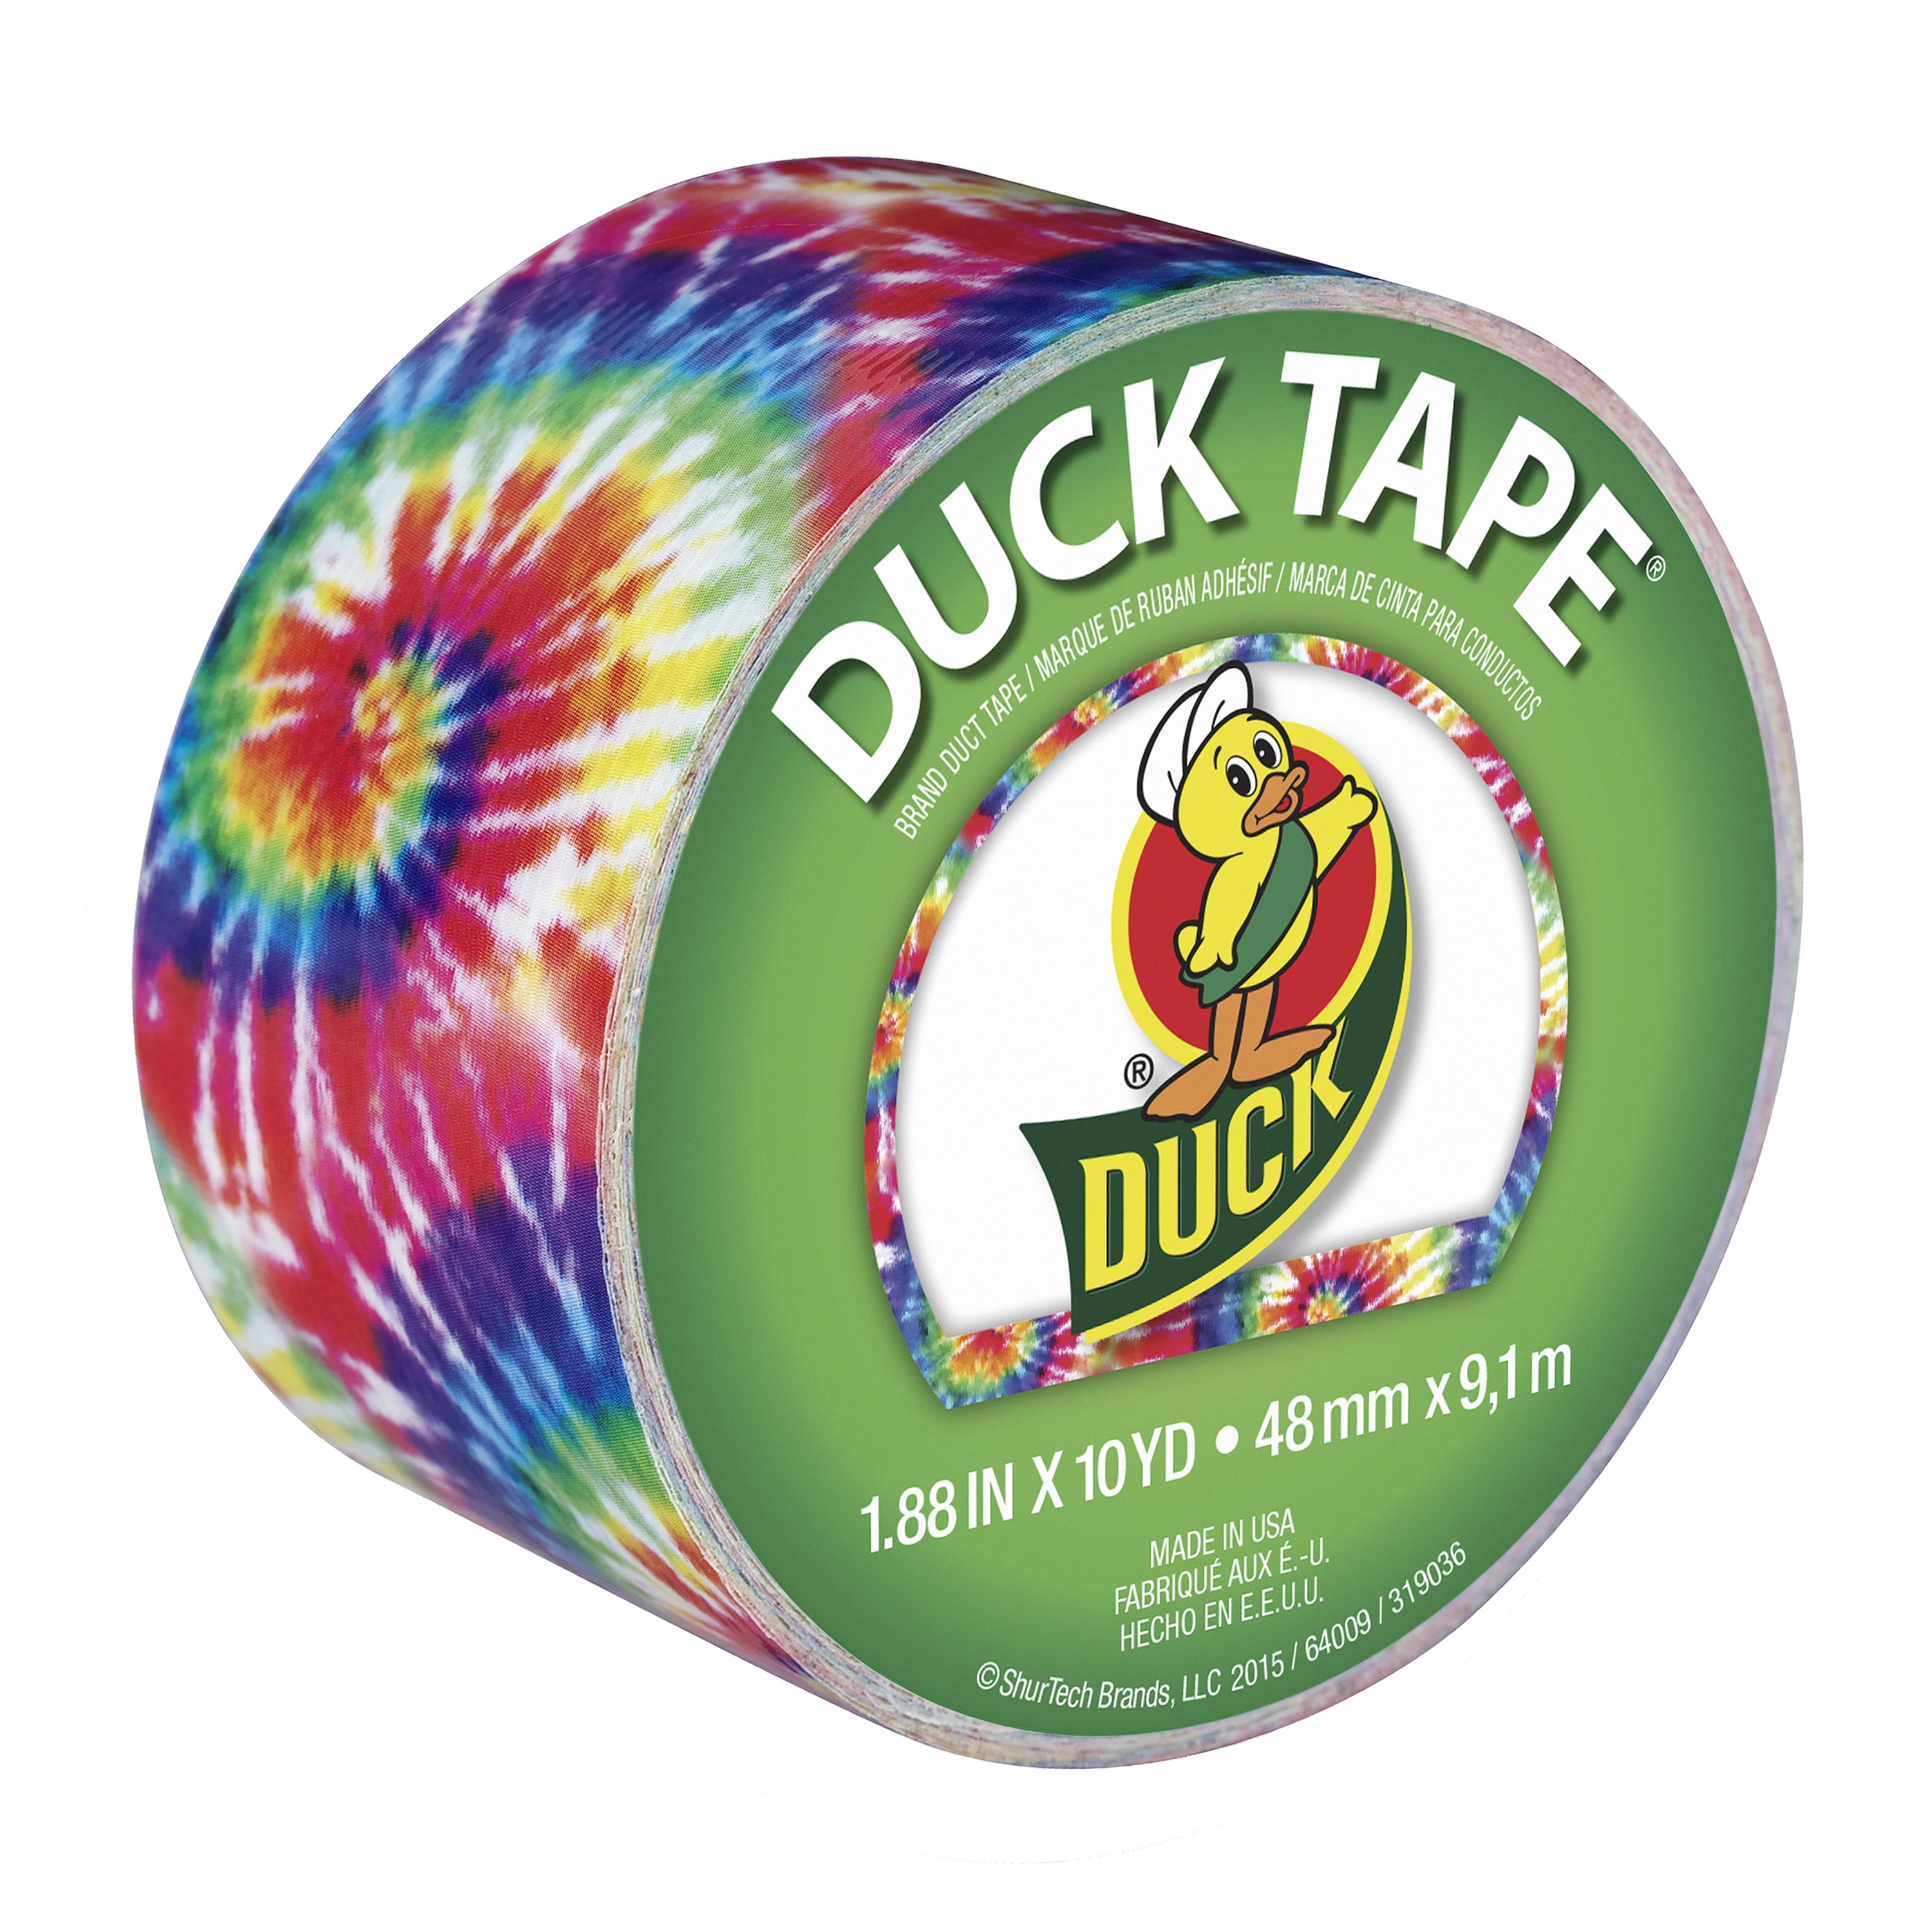 Single Roll Love Tie Dye Duck Brand 283268 Printed Duct Tape 1.88 Inches x 10 Yards 